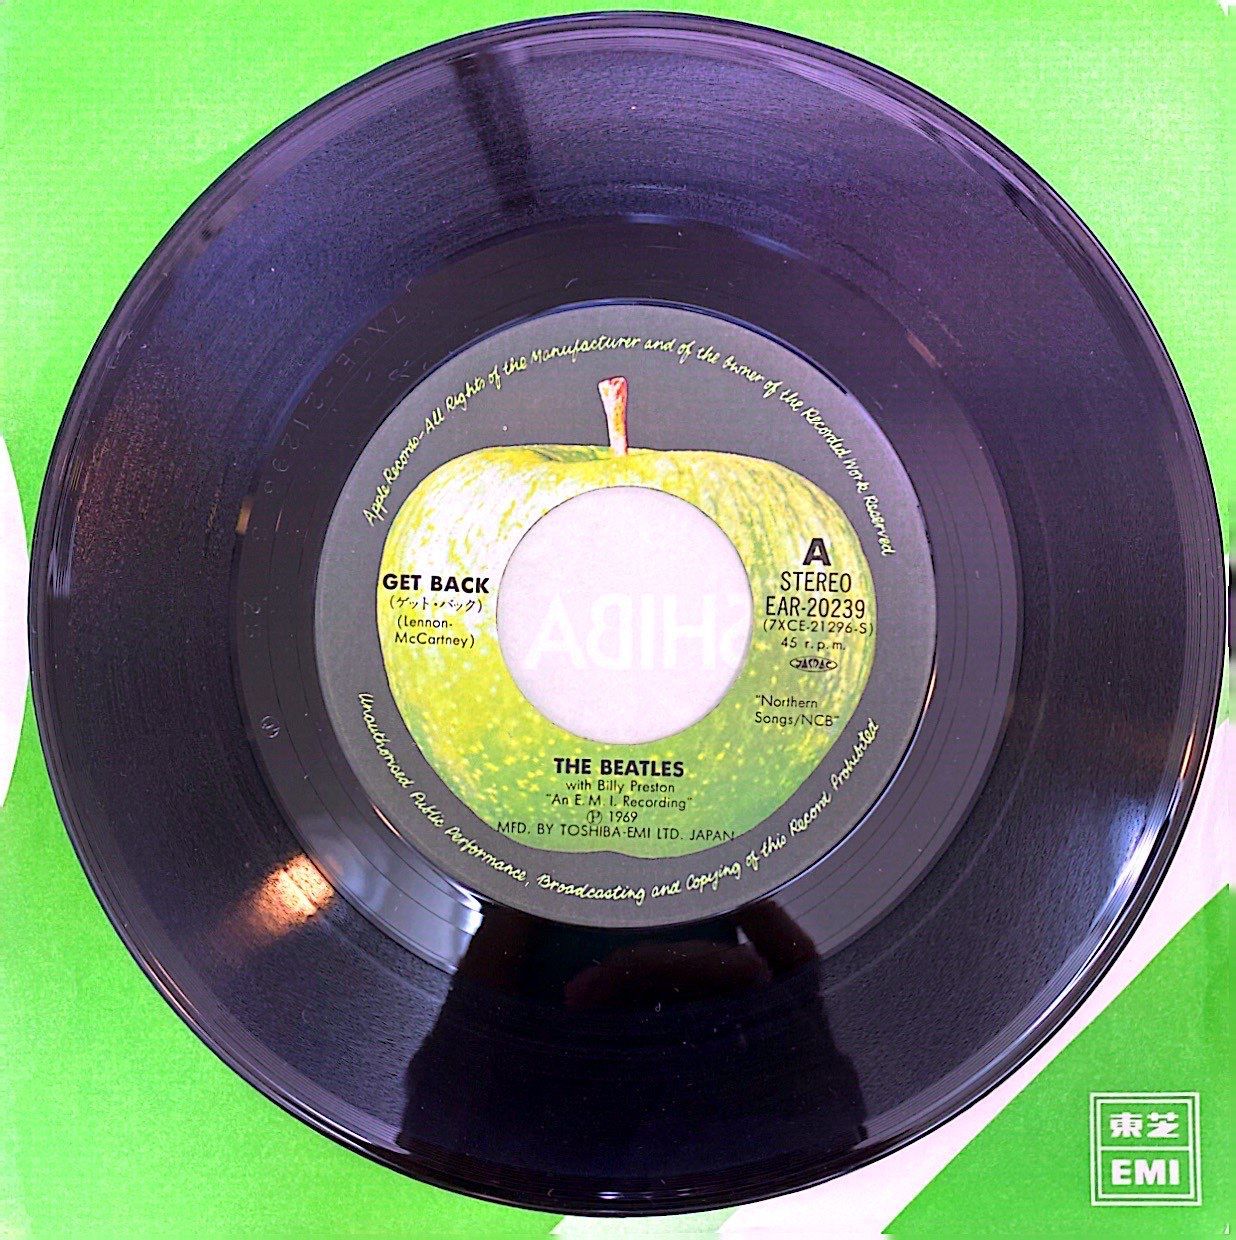 EP】The Beatles Get Back Don't let Me Down ザ・ビートルズ ゲット 